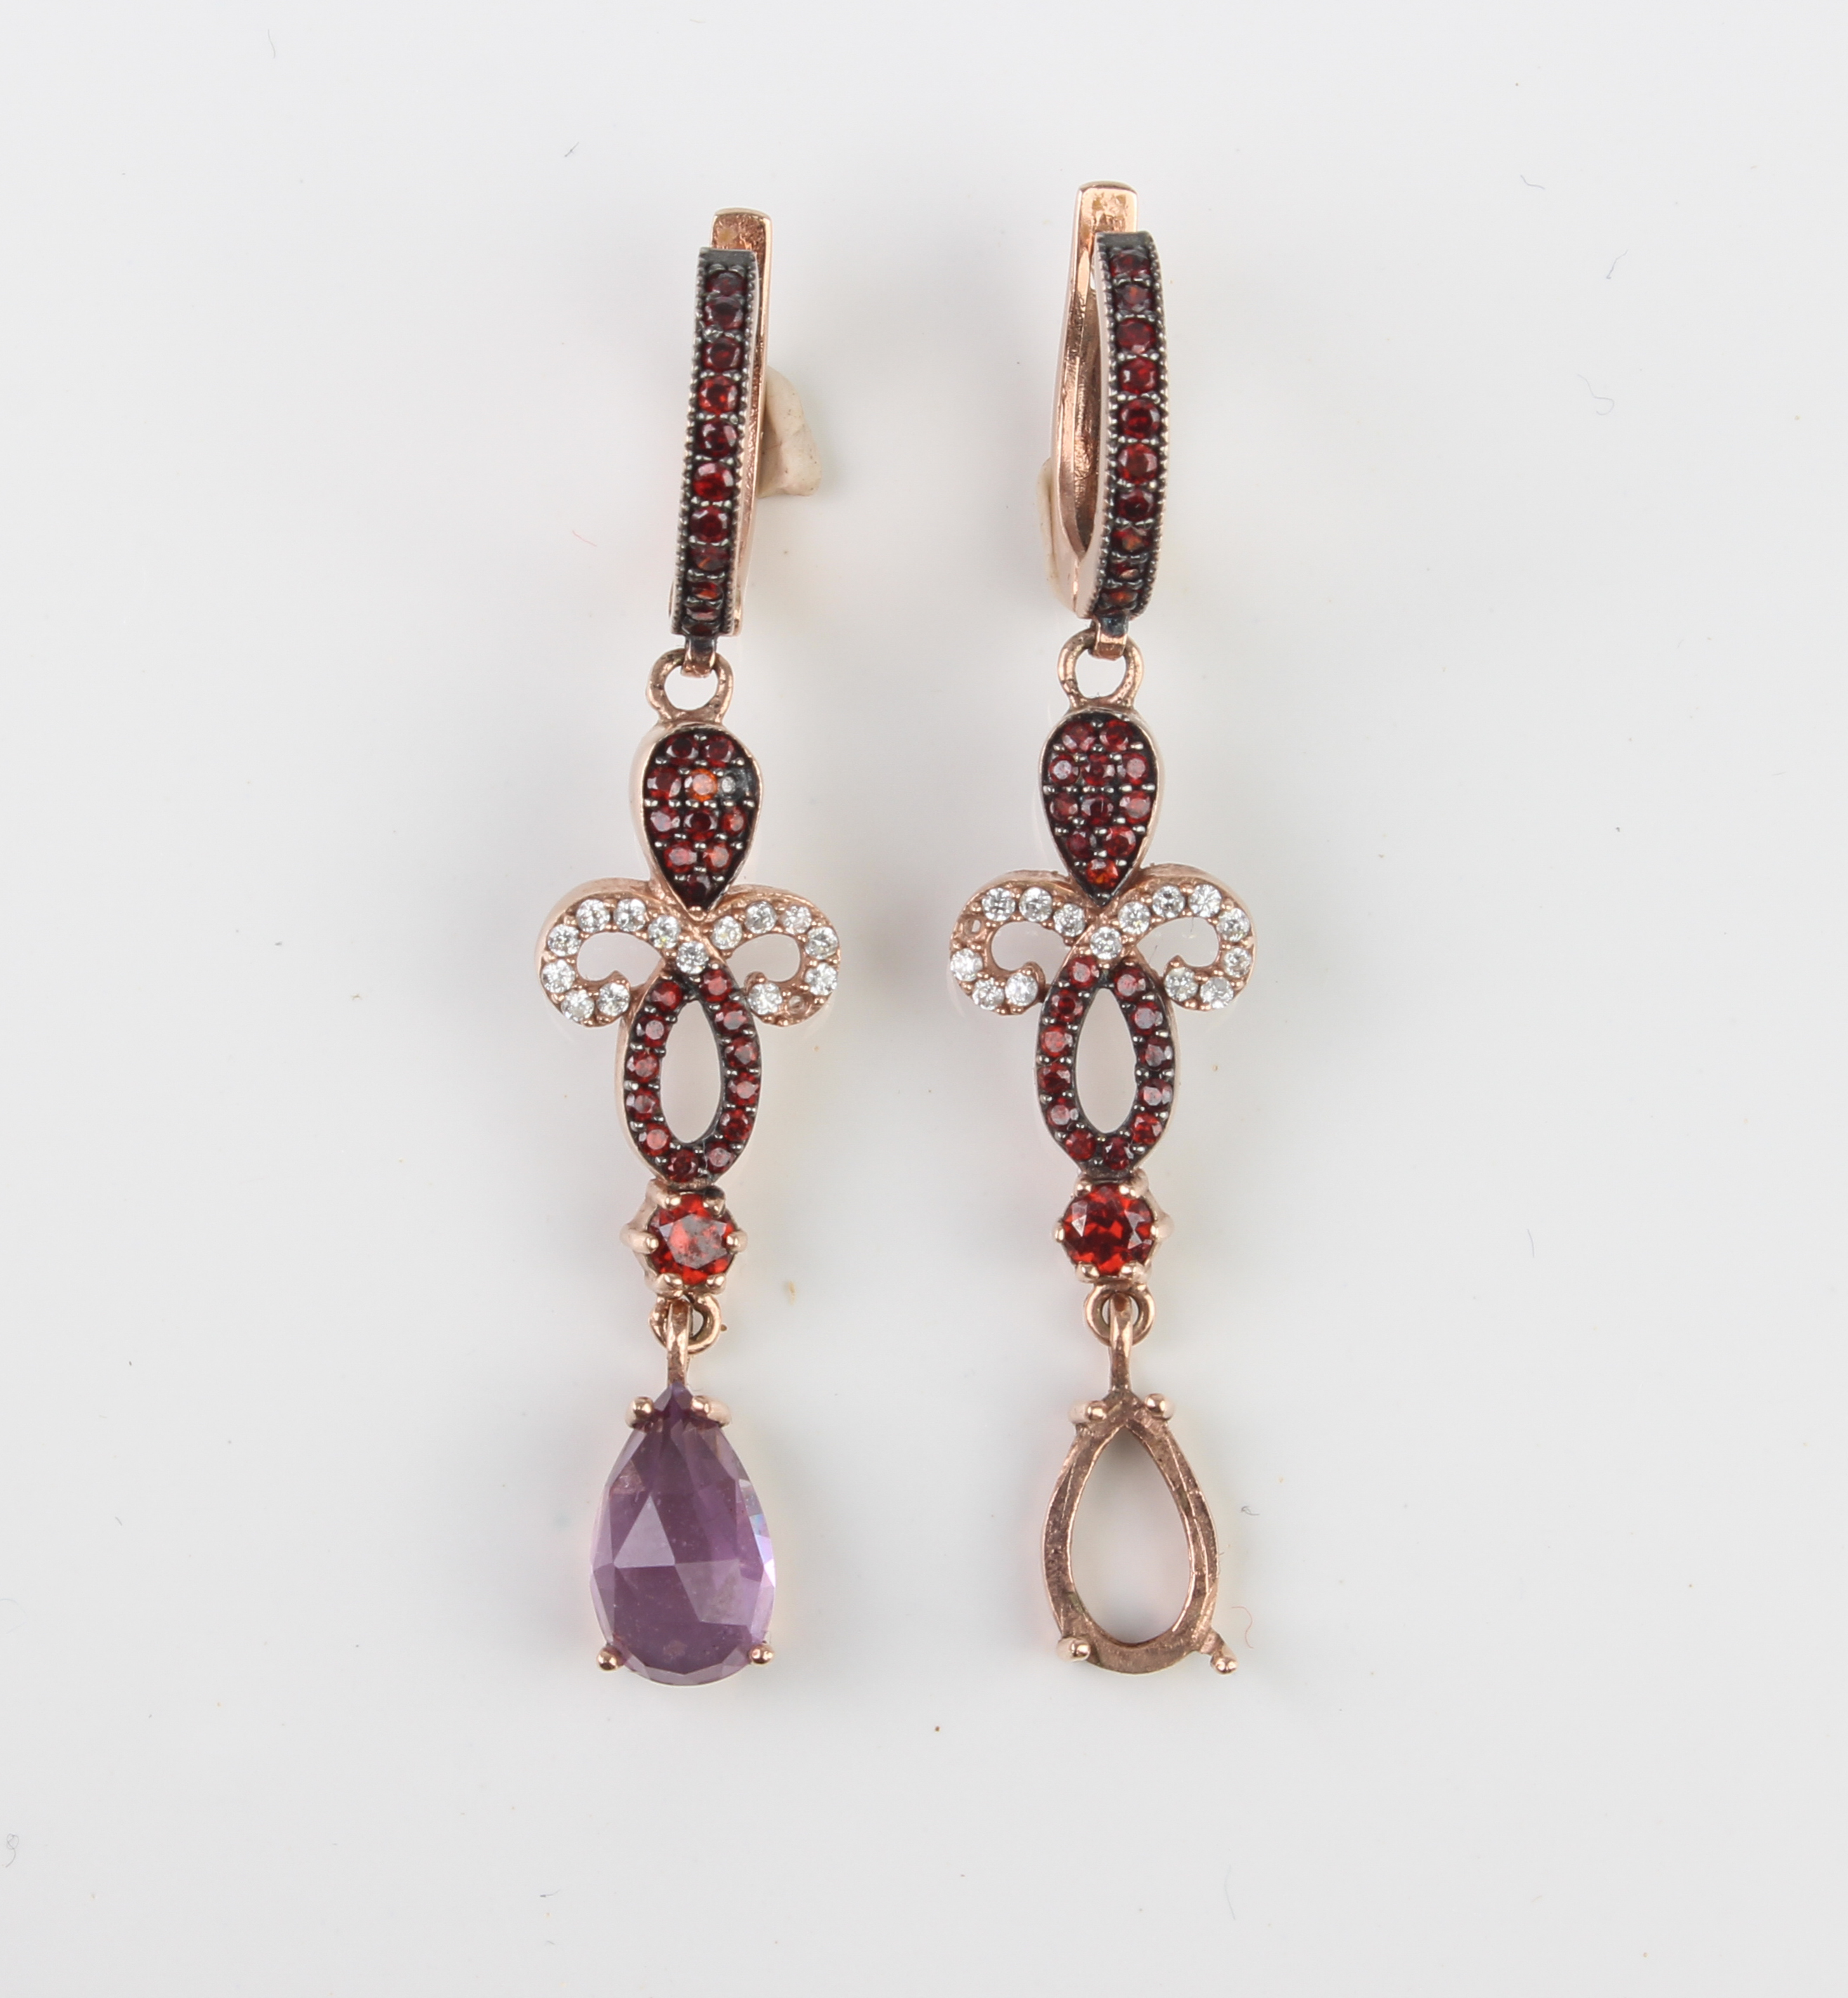 A pair of 8ct rose gold, white stone, amethyst and garnet drop earrings - marked '333', with post